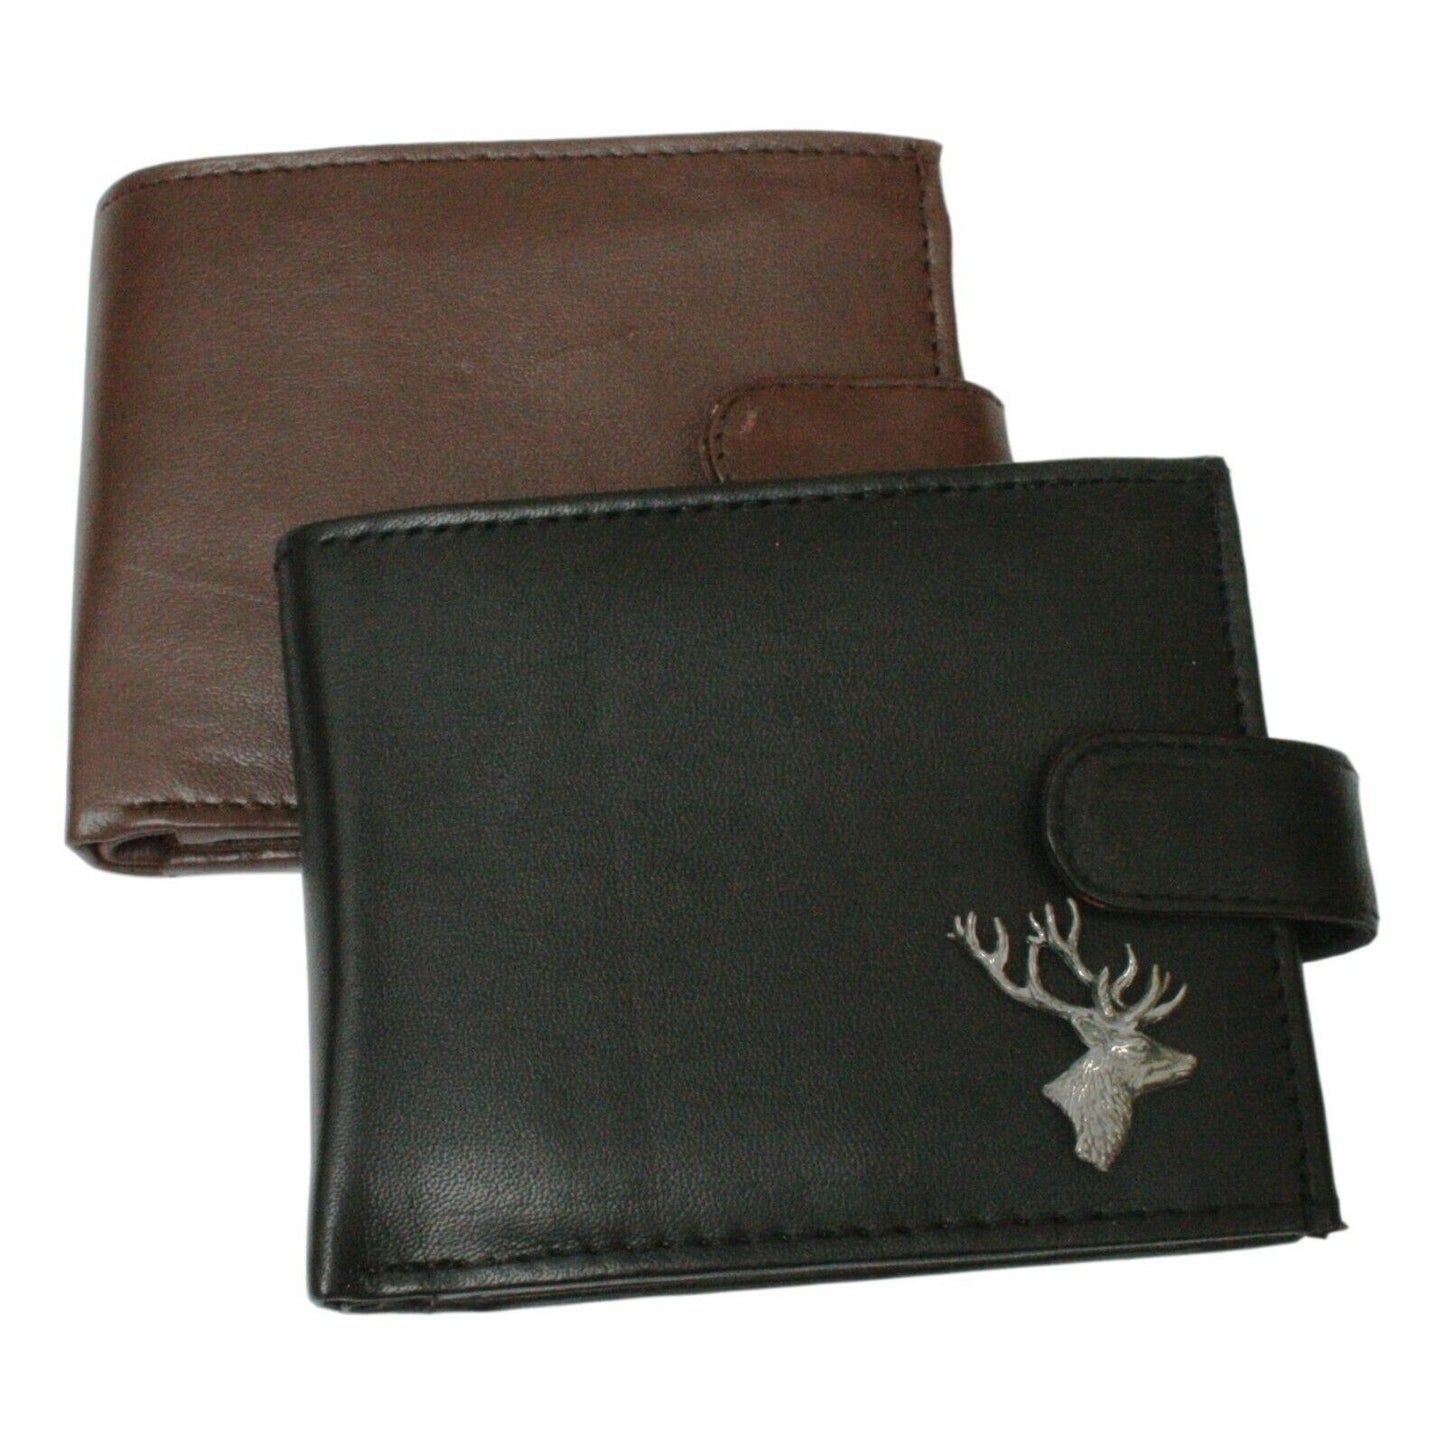 Stag Head Leather Wallet In Black Or Brown